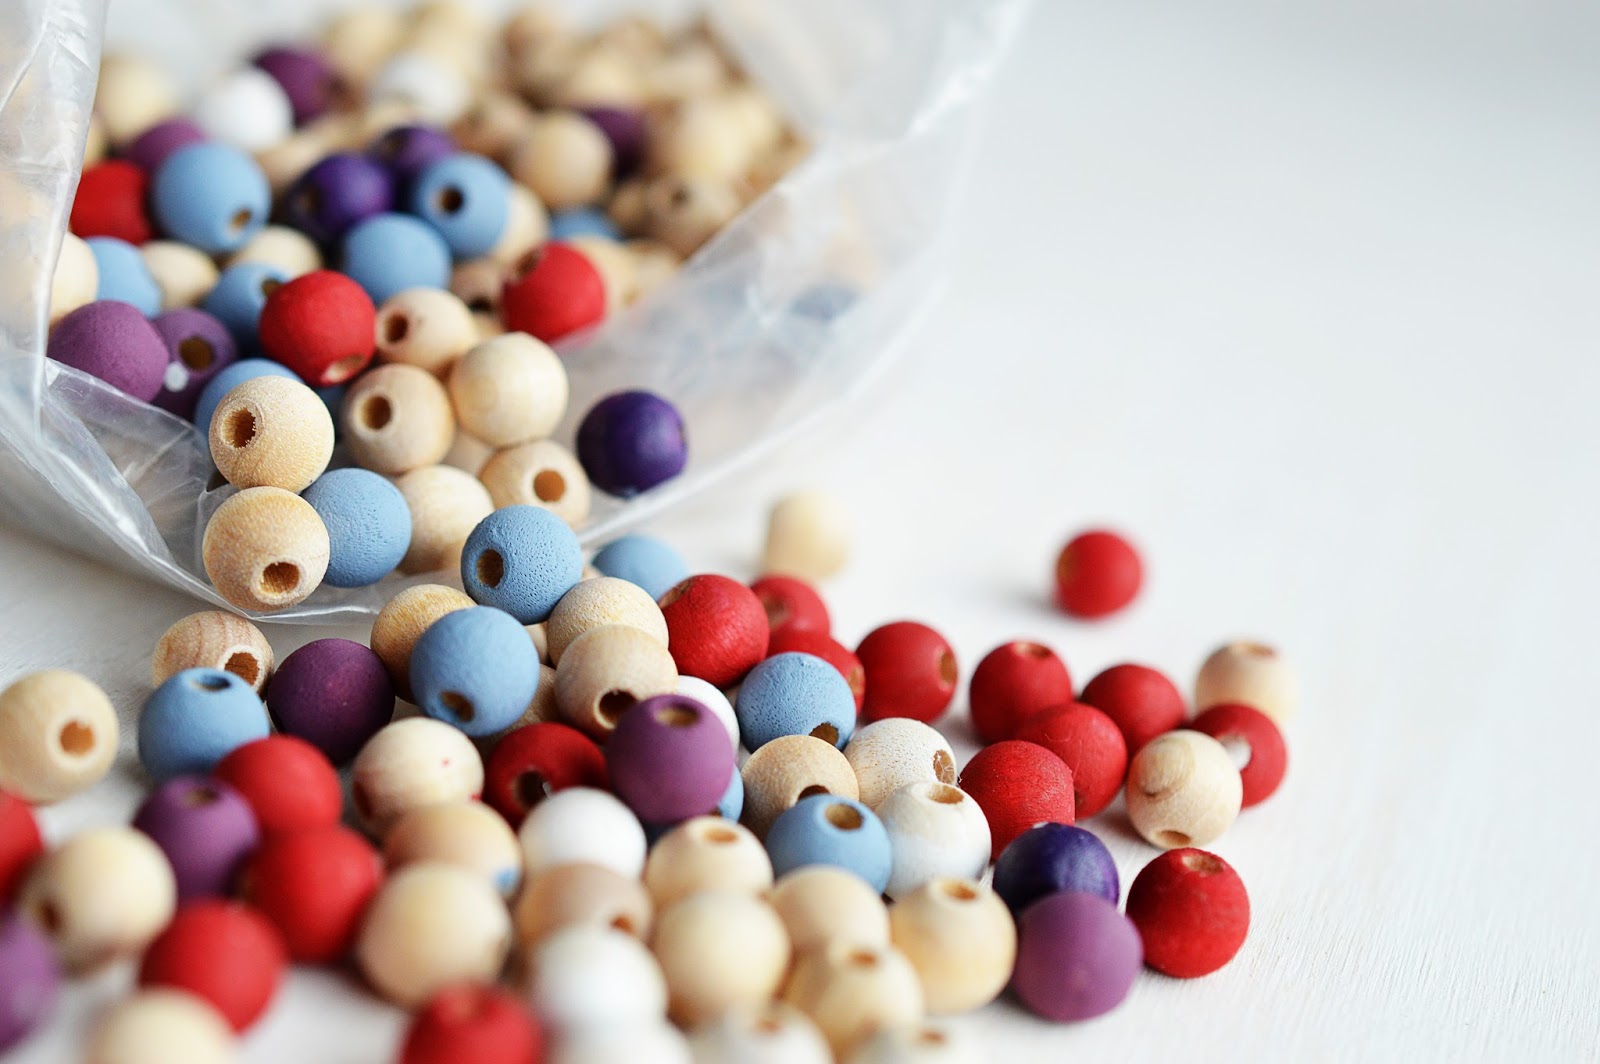 How to Paint Wooden Beads | Motte's Blog